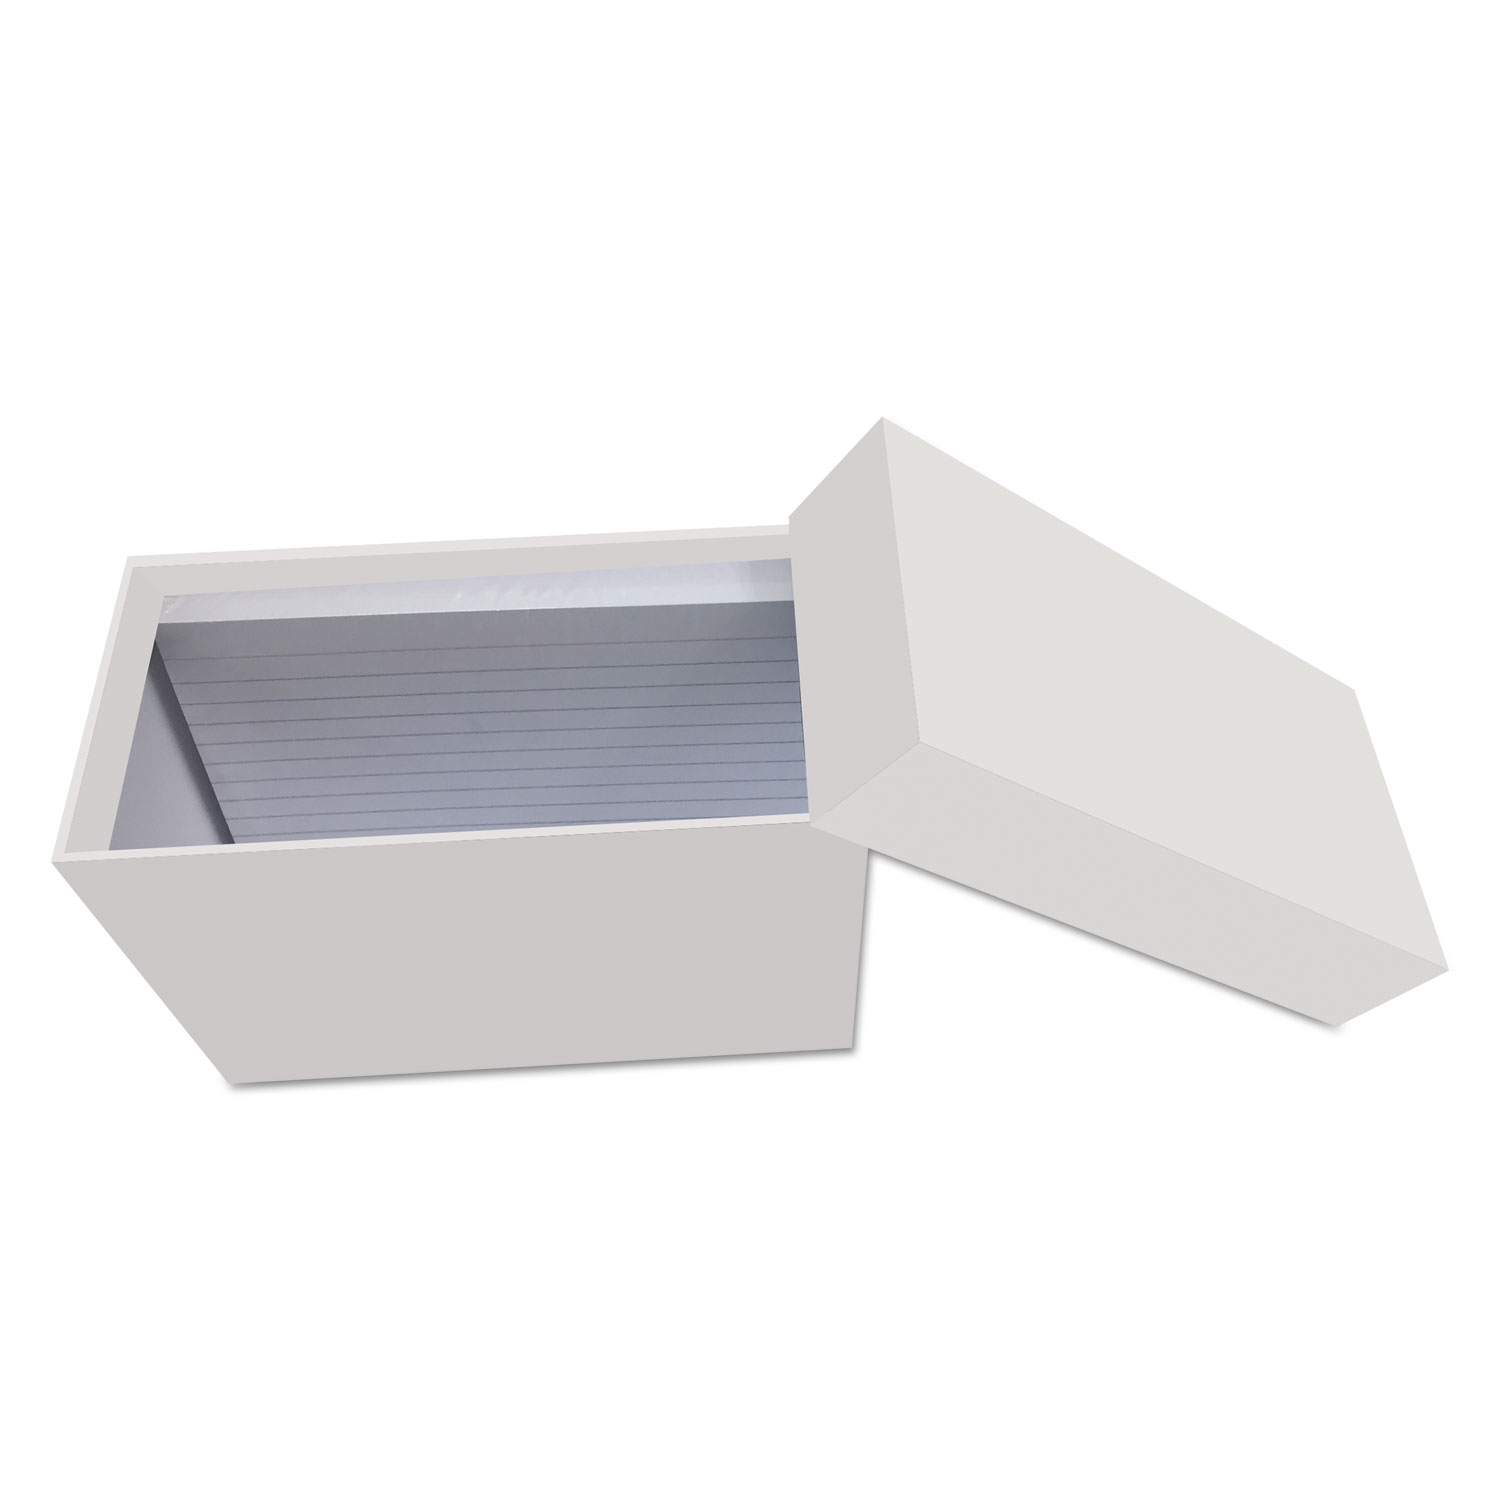 Index Card Box with 100 Ruled Index Cards, 4 x 6, Gray